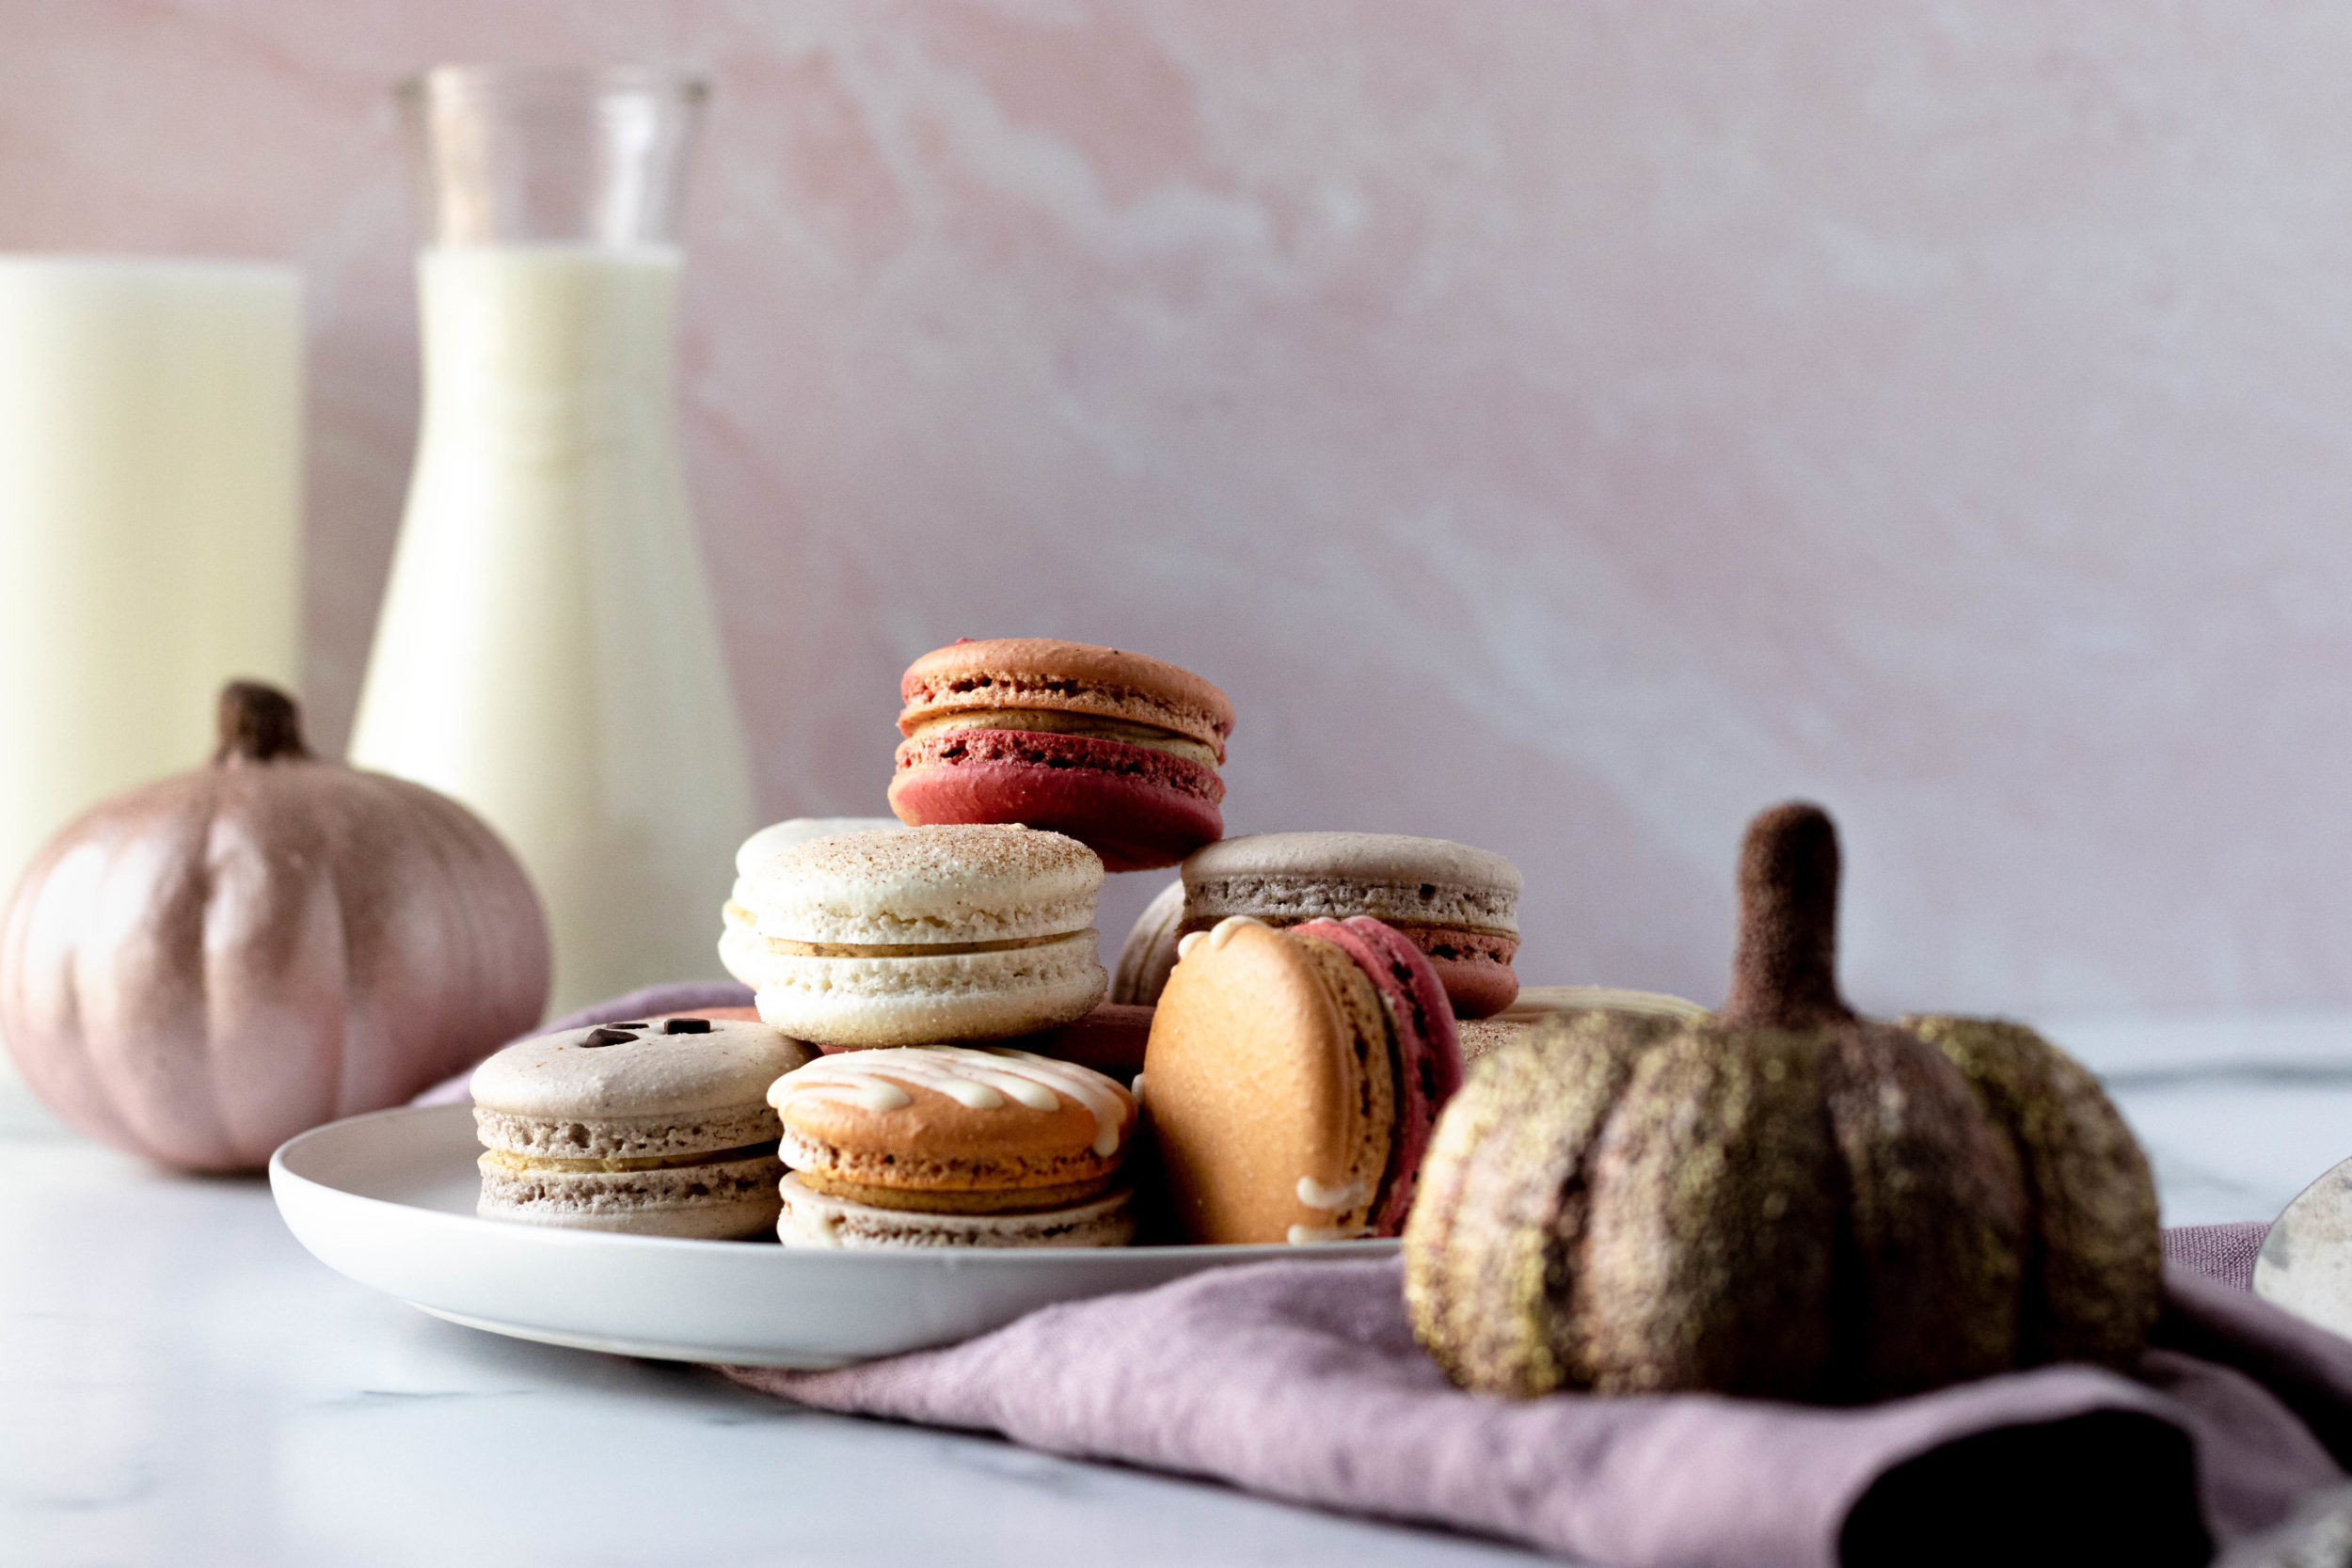 Poeme macarons with pumpkins, milk, and candles on a counter.